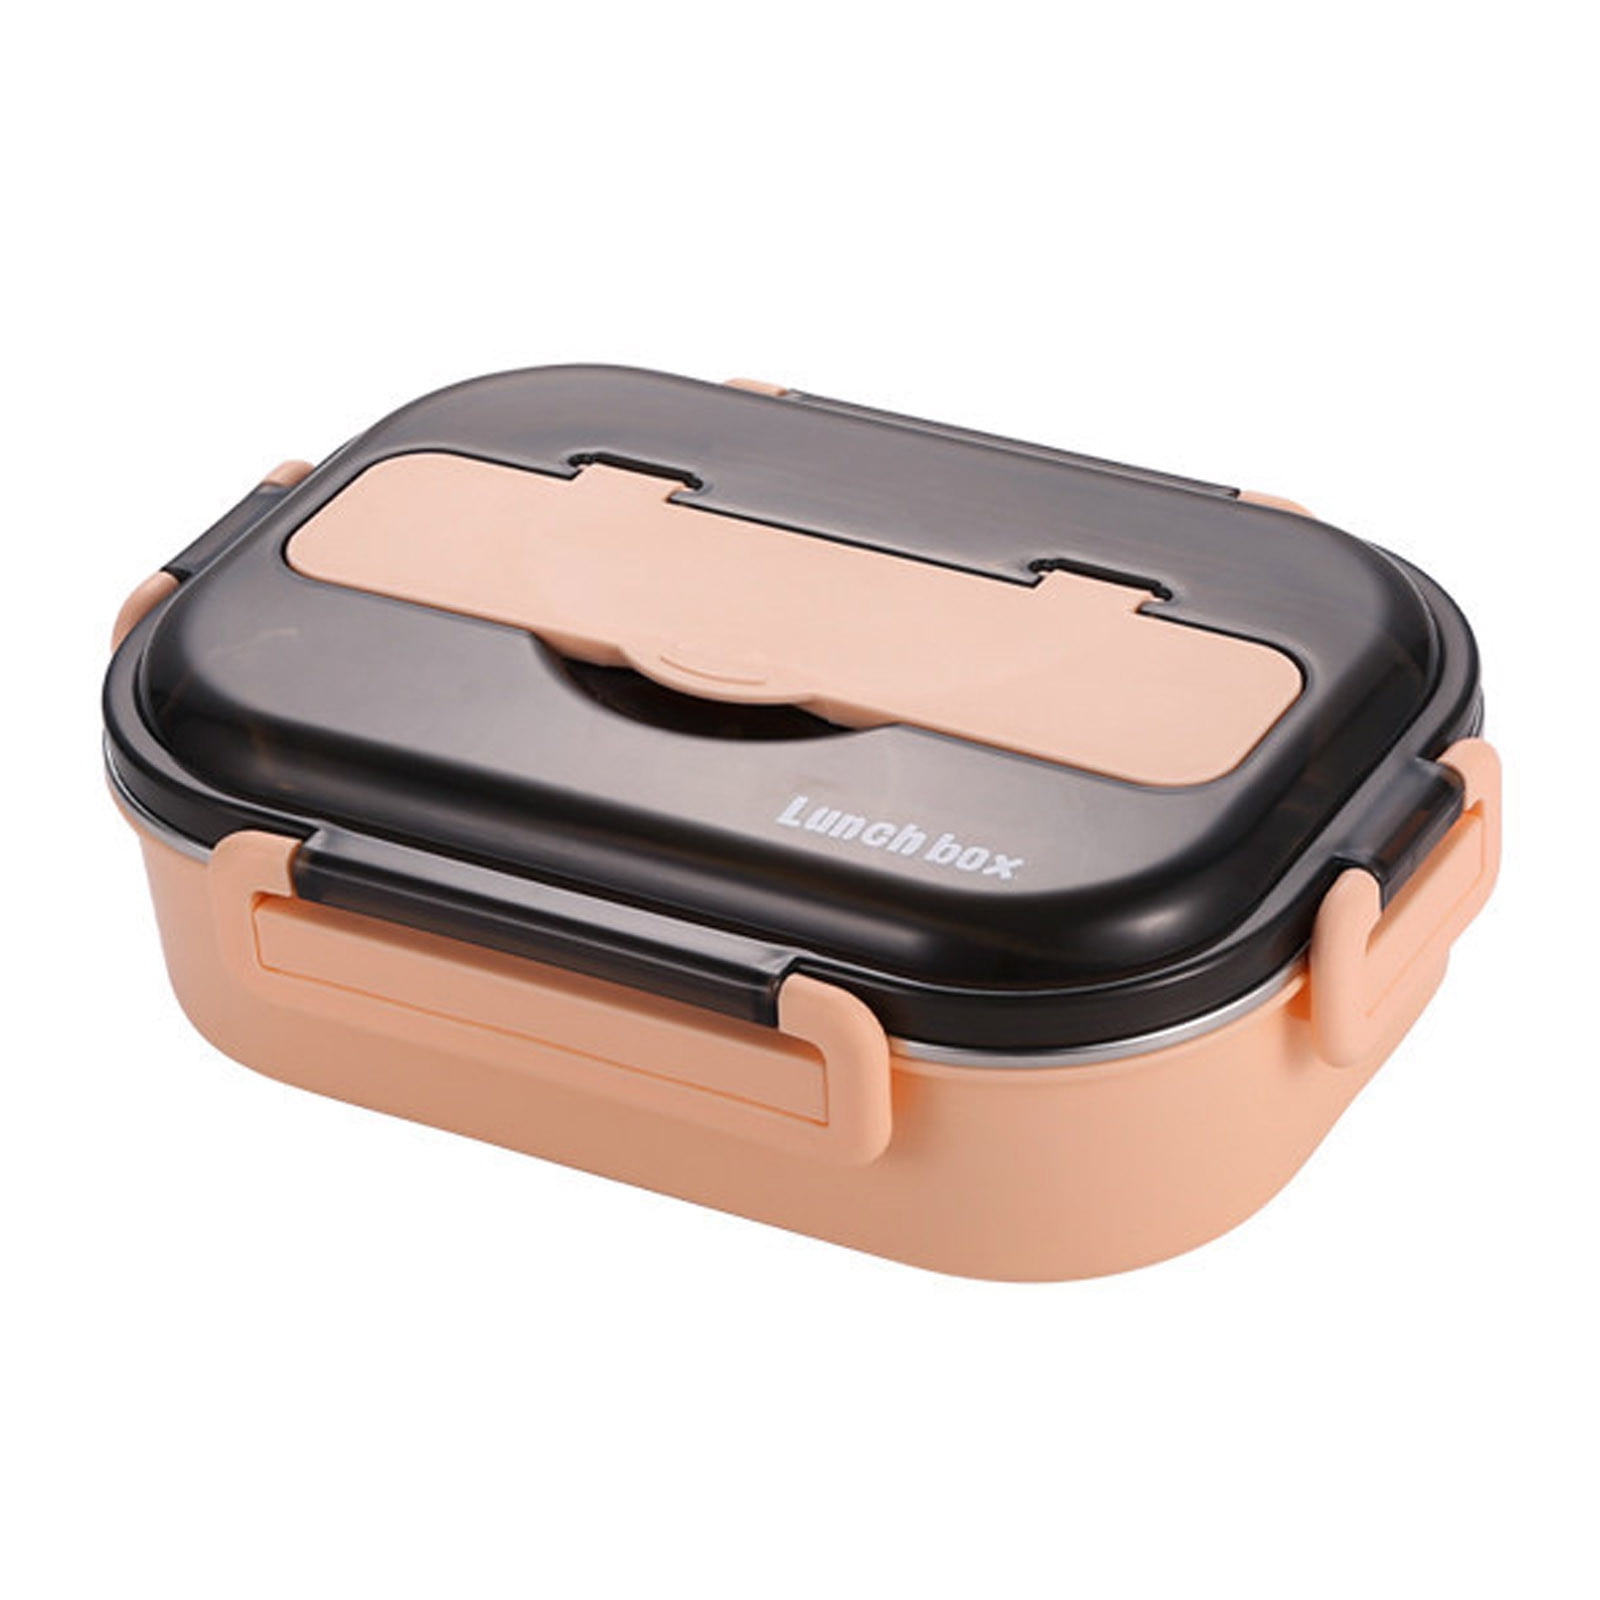 Stackable Bento Lunch Box, YFBXG 3 Layers Stainless Steel Leakproof Food  Storage Container Thermal Insulated Bento Lunch Container with Lunch Bag